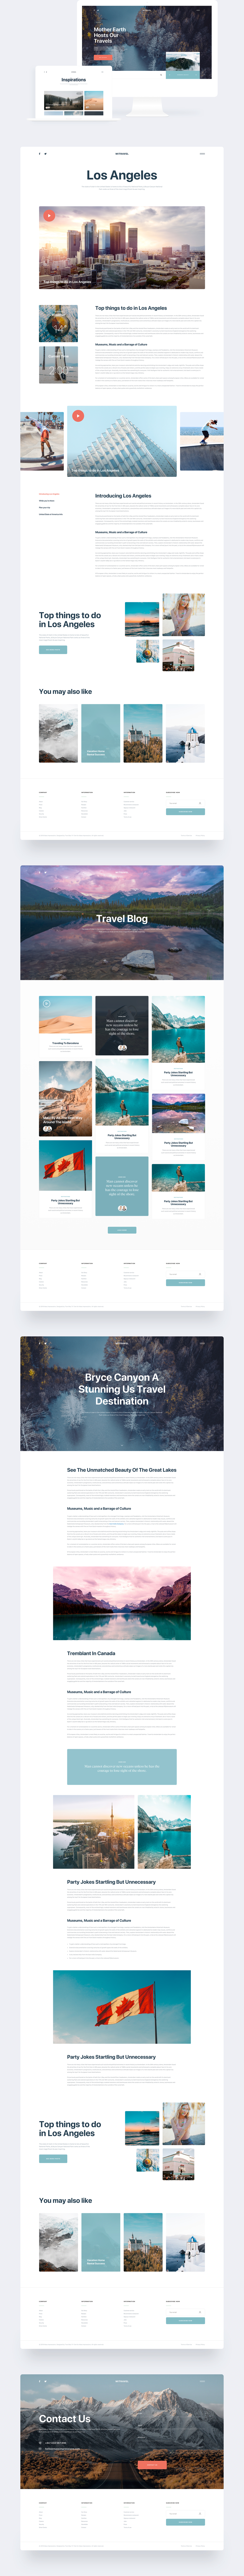 MI Travel - Free Sketch Template - MI Travel is a sketch blog template to help you build a clean blog style for travel website or creative blog. There are 6 artboards included in the design. The artboard is fully editable, layered, carefully organized.